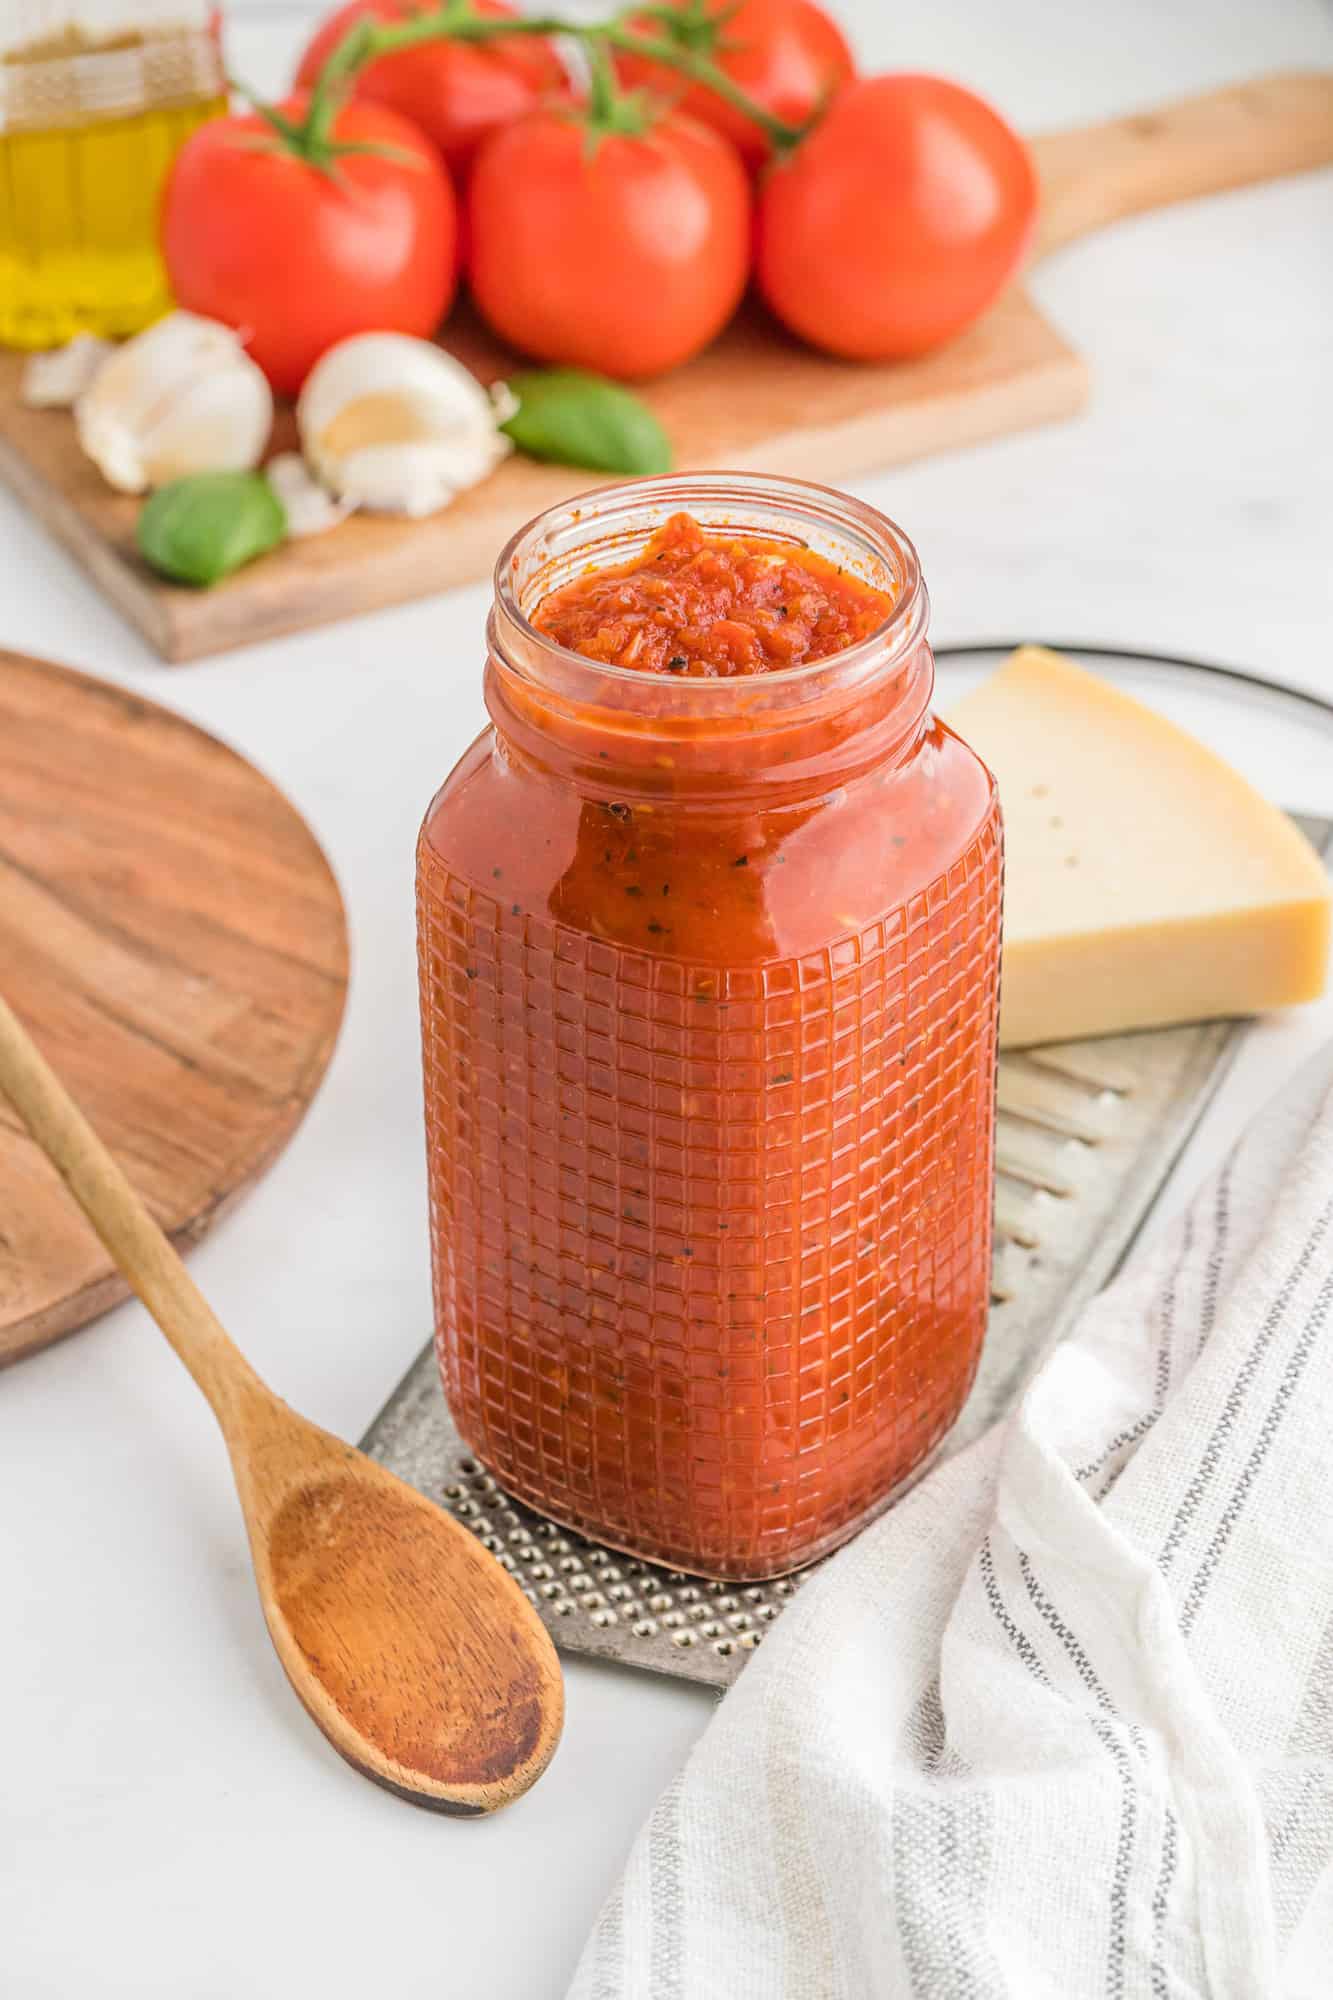 Homemade pizza sauce in a glass jar with tomatoes in the background.